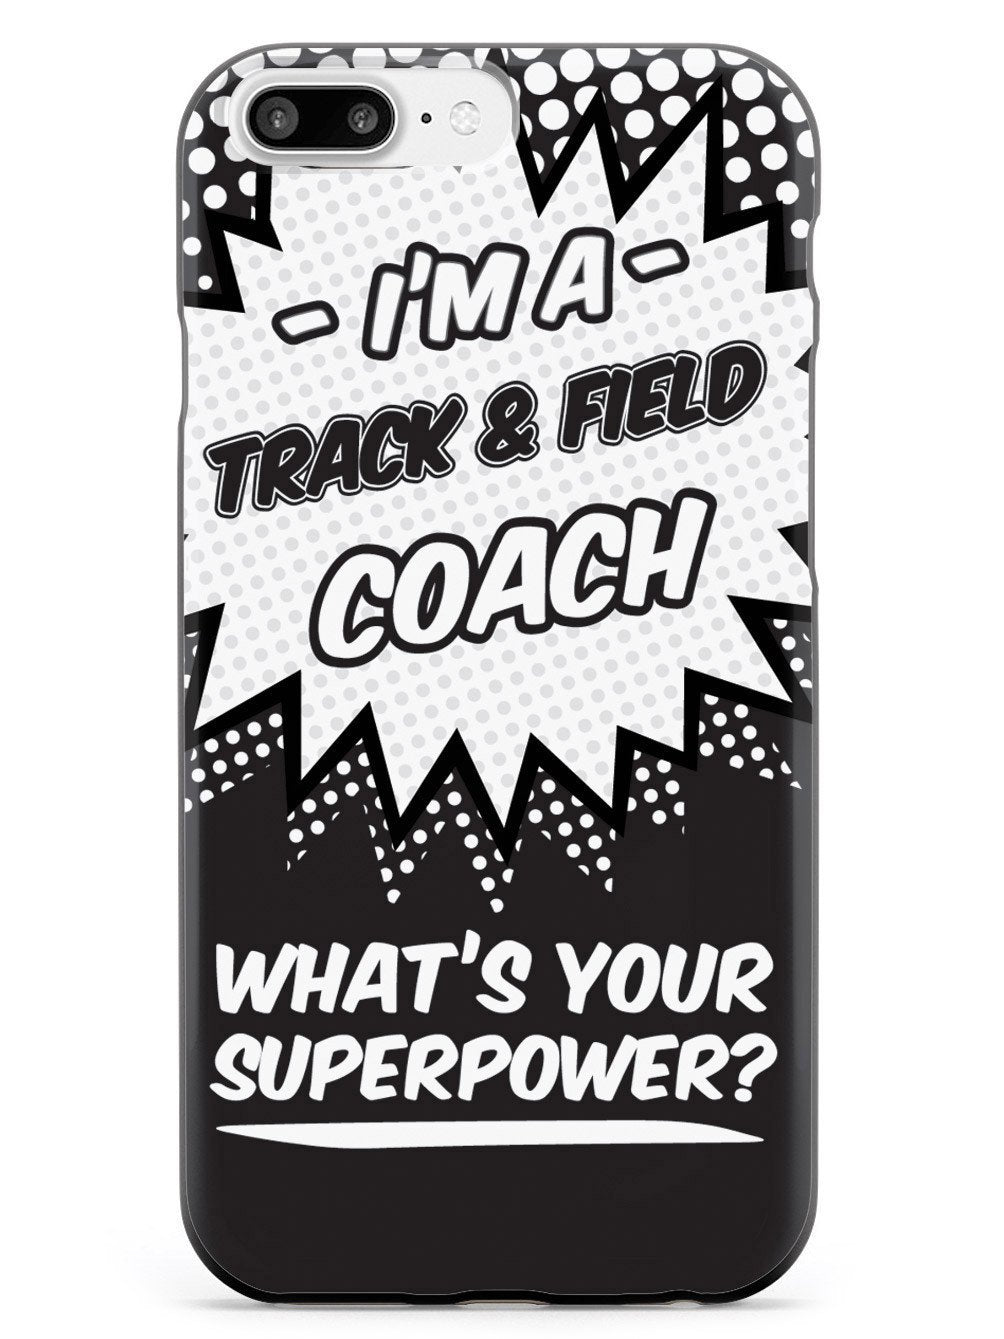 Track & Field Coach - What's Your Superpower? Case